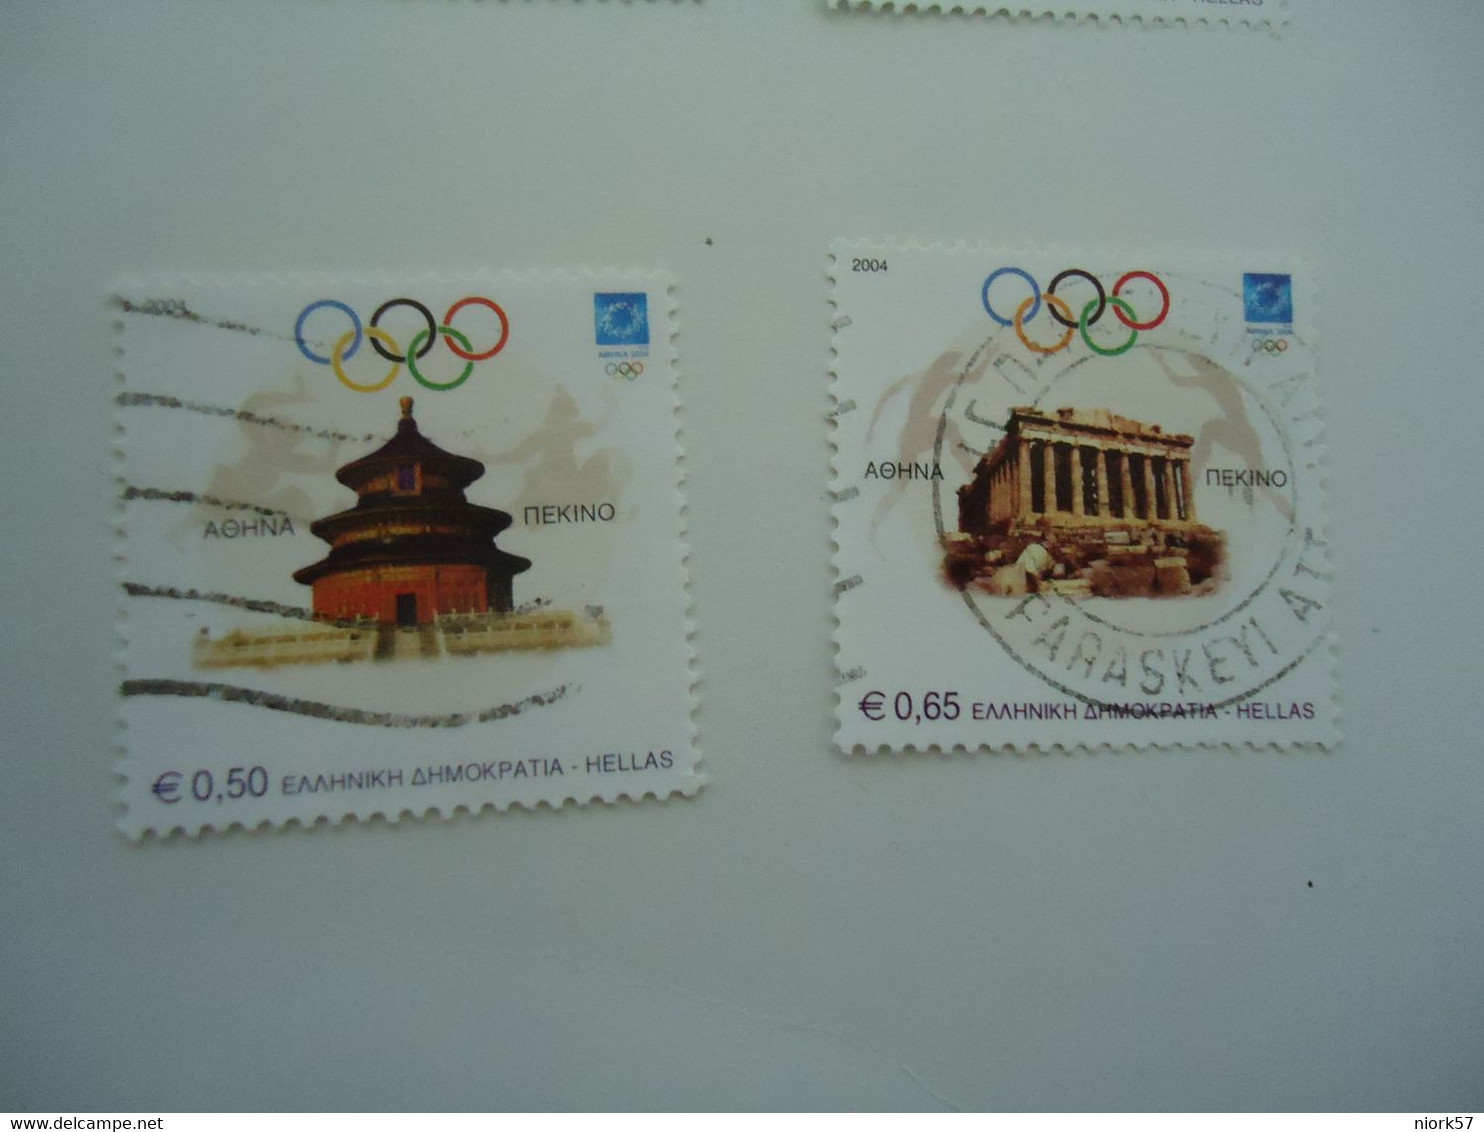 GREECE USED STAMPS SET 2 OLYMPIC GAMES 2004 ATHENS BEIGING - Sommer 2004: Athen - Paralympics